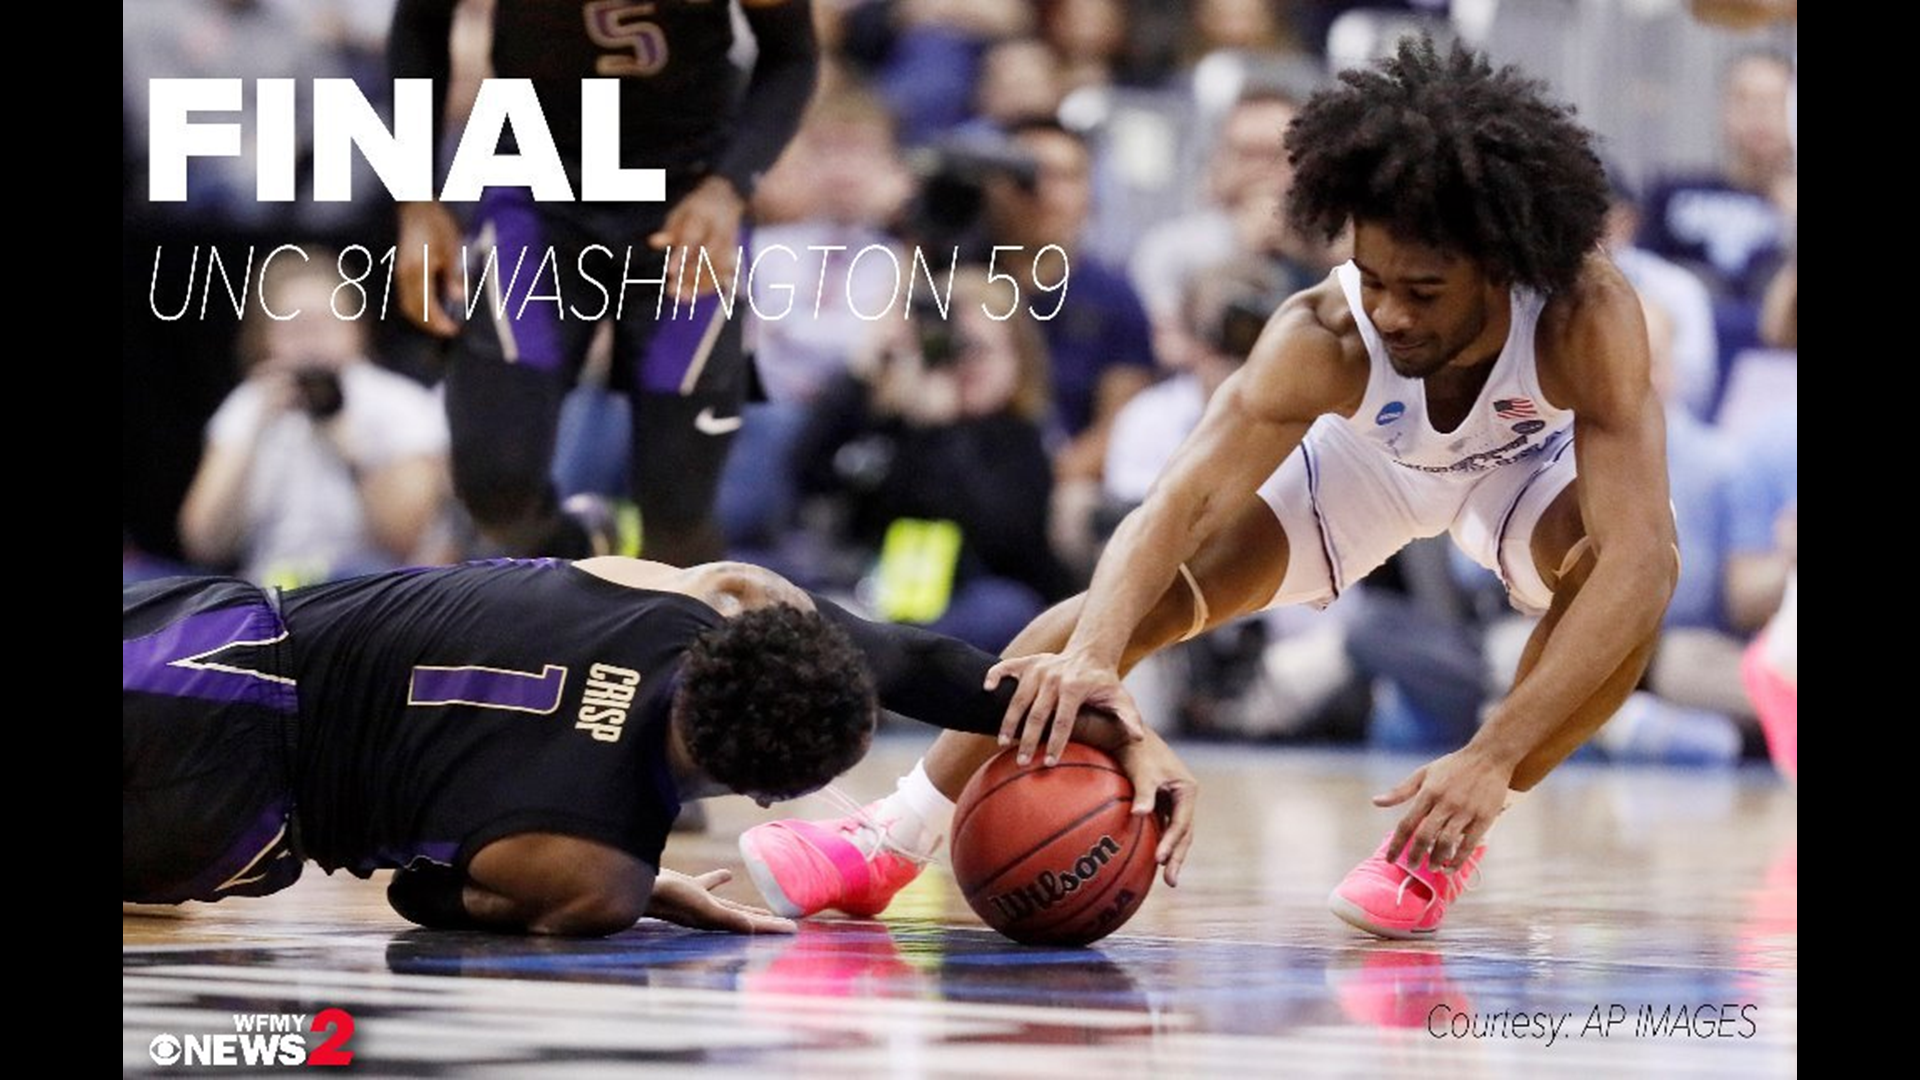 North Carolina forwards Nassir Little and Luke Maye react to the Tar Heels' 81-59 win over Washington in the second round of the 2019 NCAA Tournament.